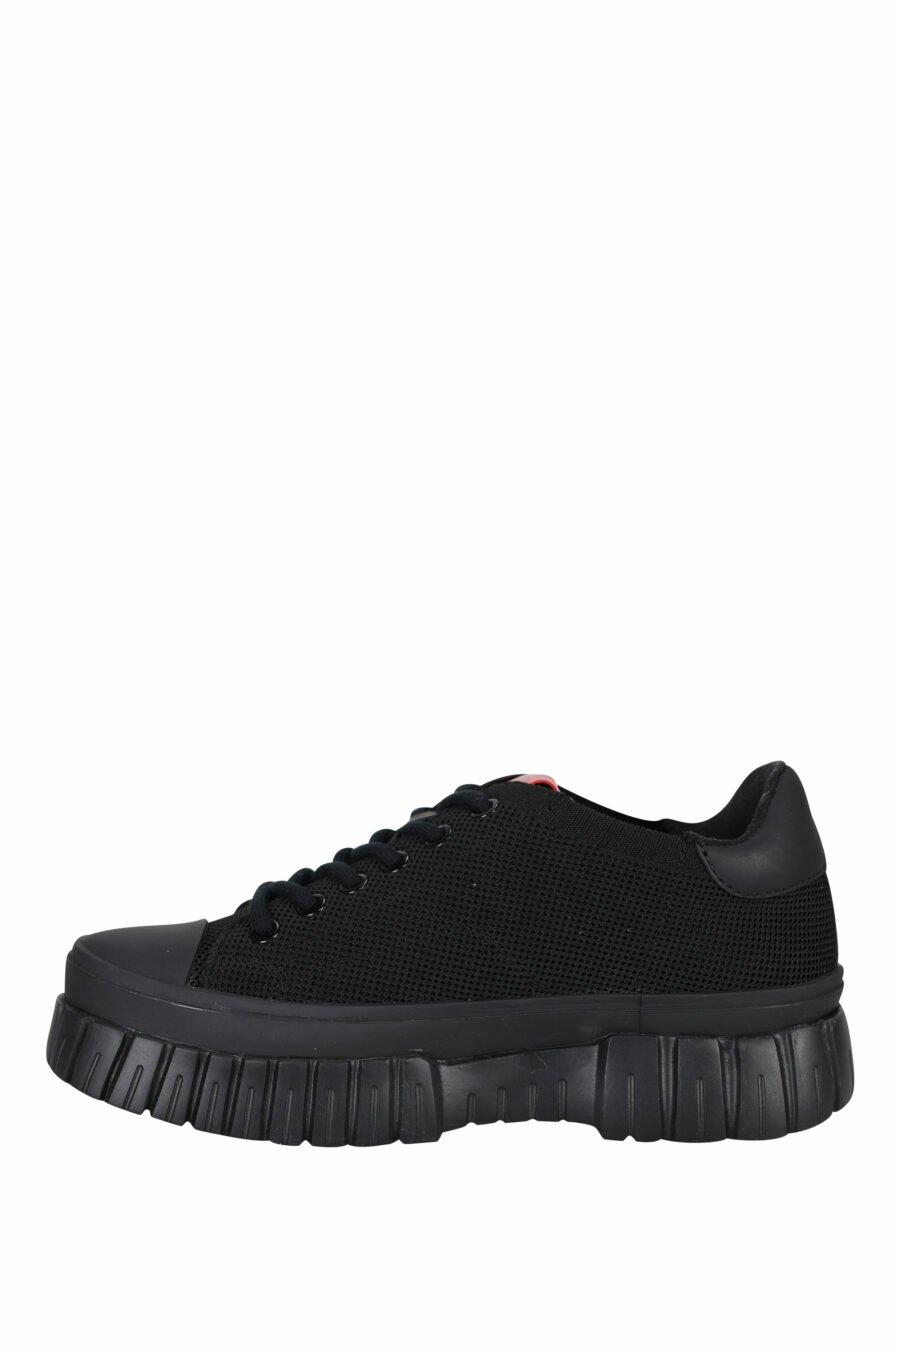 Black mix trainers with logo - 8054653167971 2